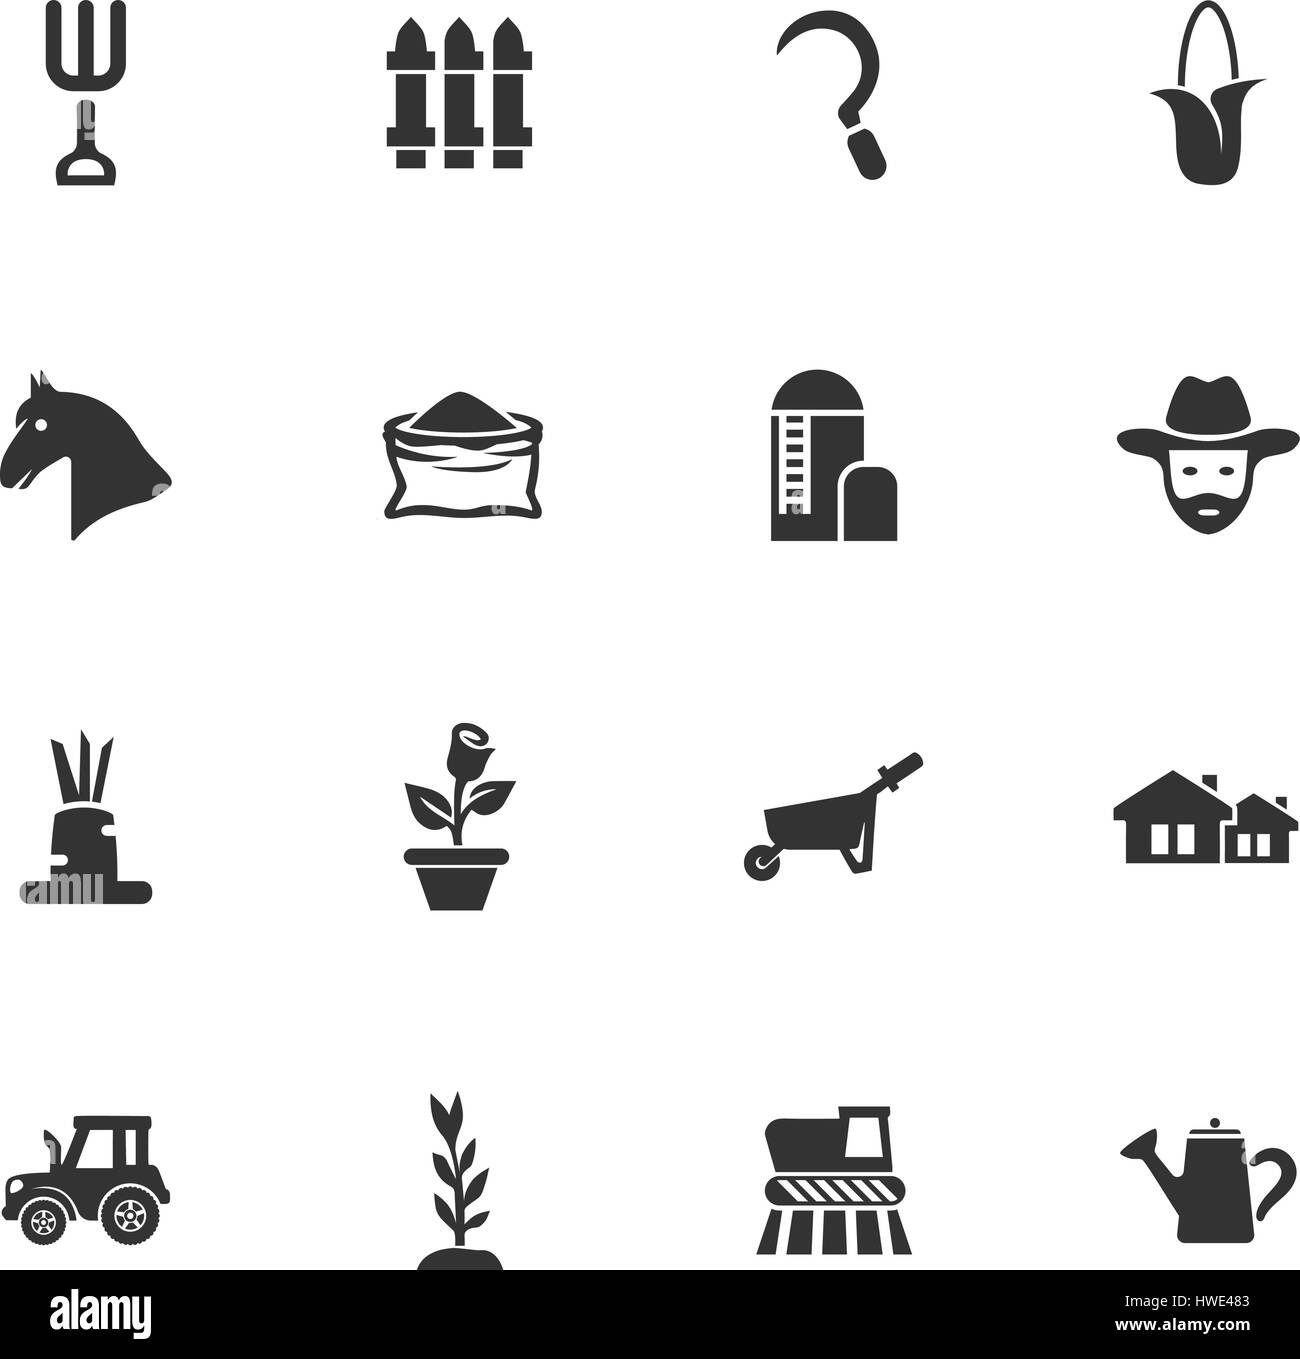 Agricultural icons set for web sites and user interface Stock Vector